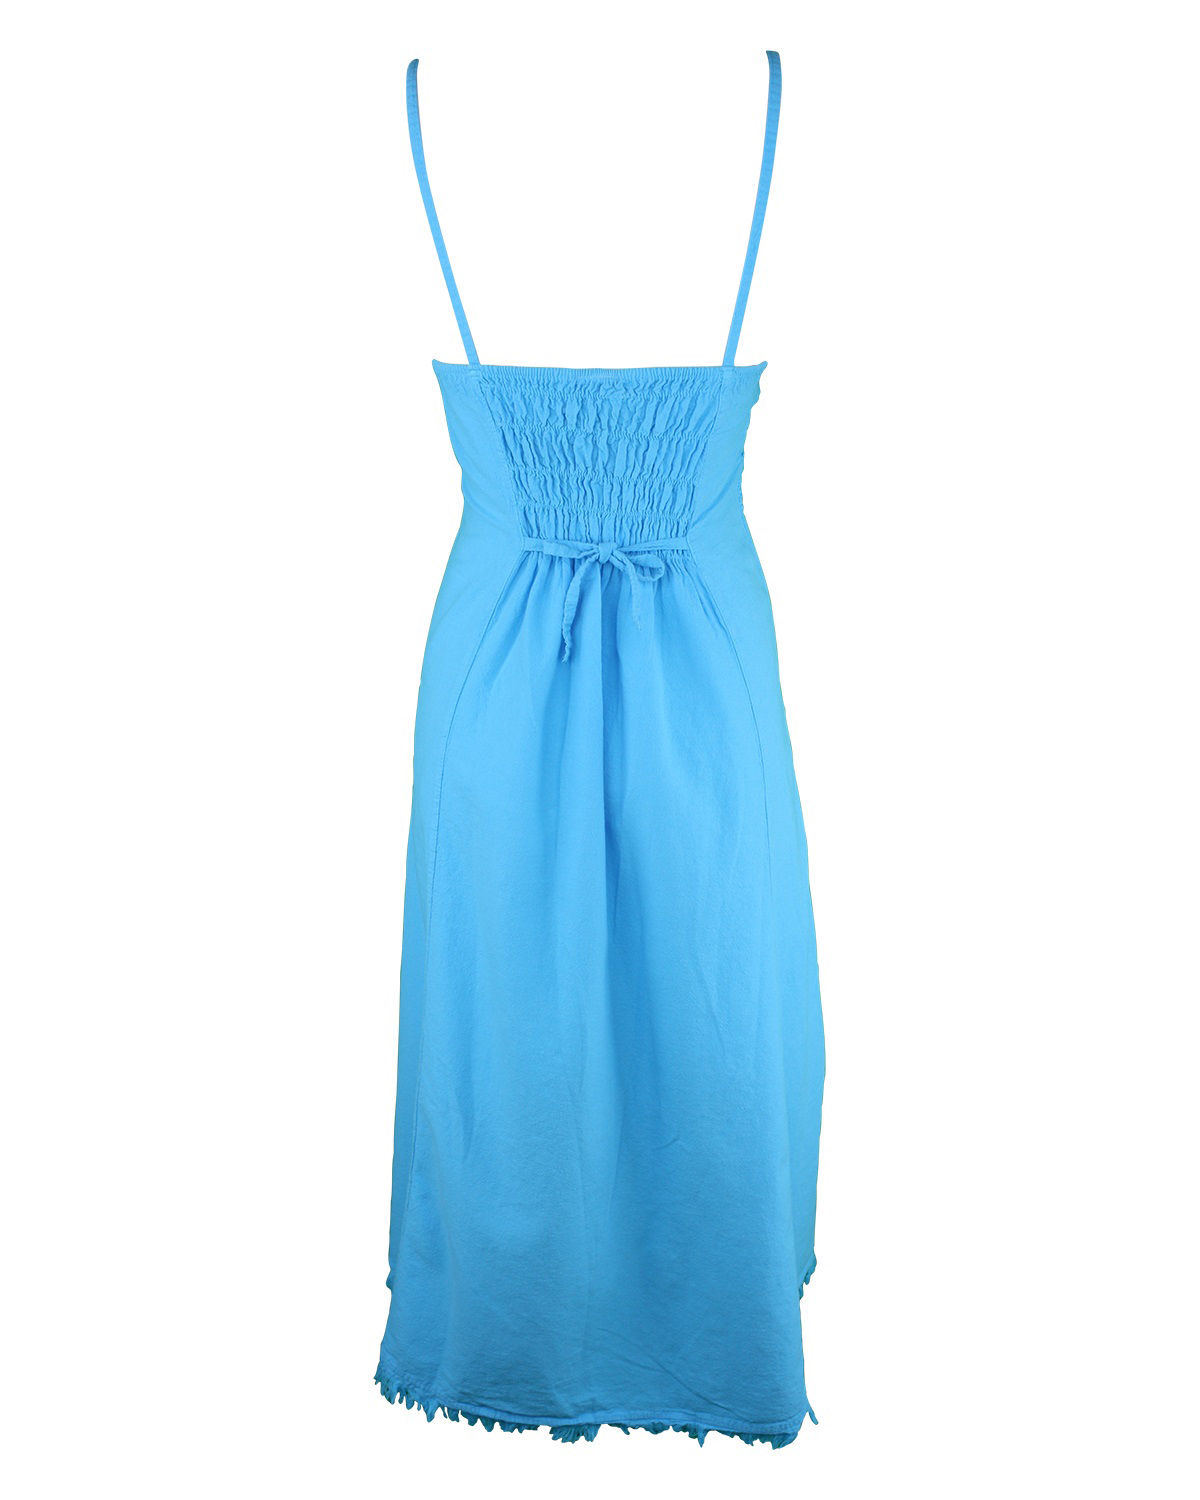 Tropical Sundress – Summer Breeze – Spaghetti Strap – Mid Length – Turquoise – Back View